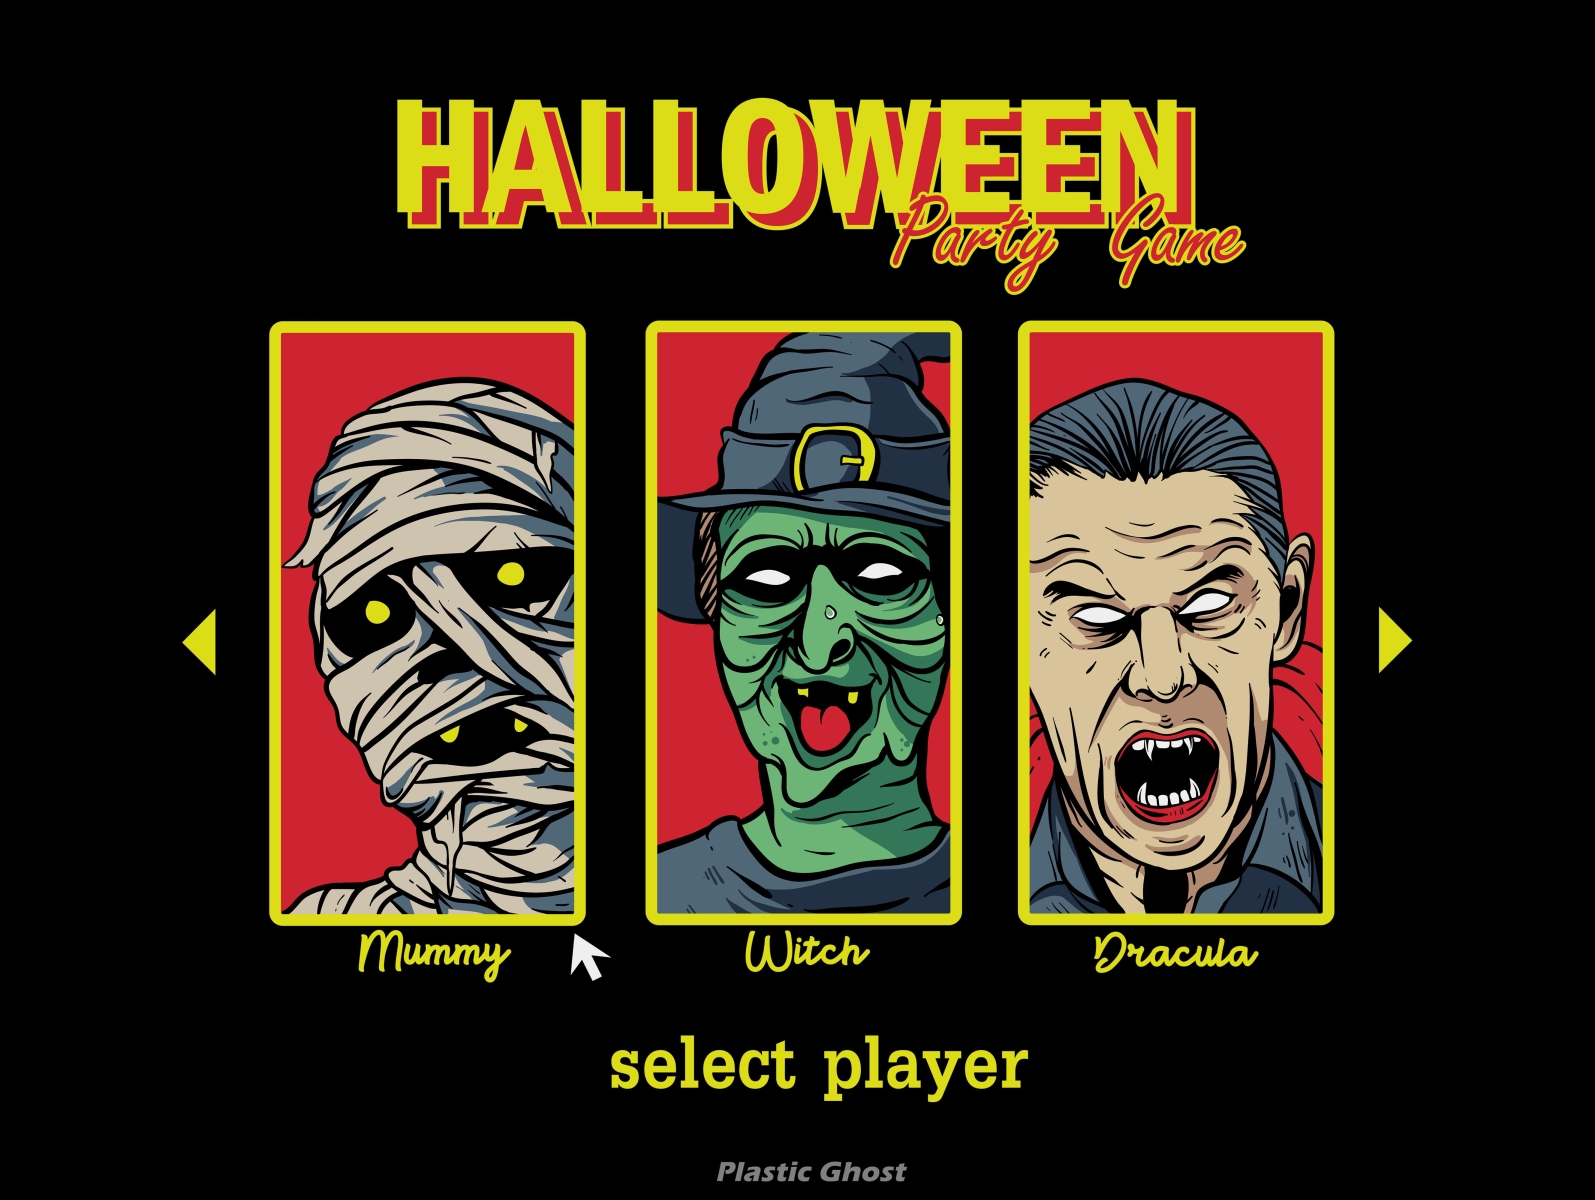 halloween-party-game-by-plastic-ghost-on-dribbble